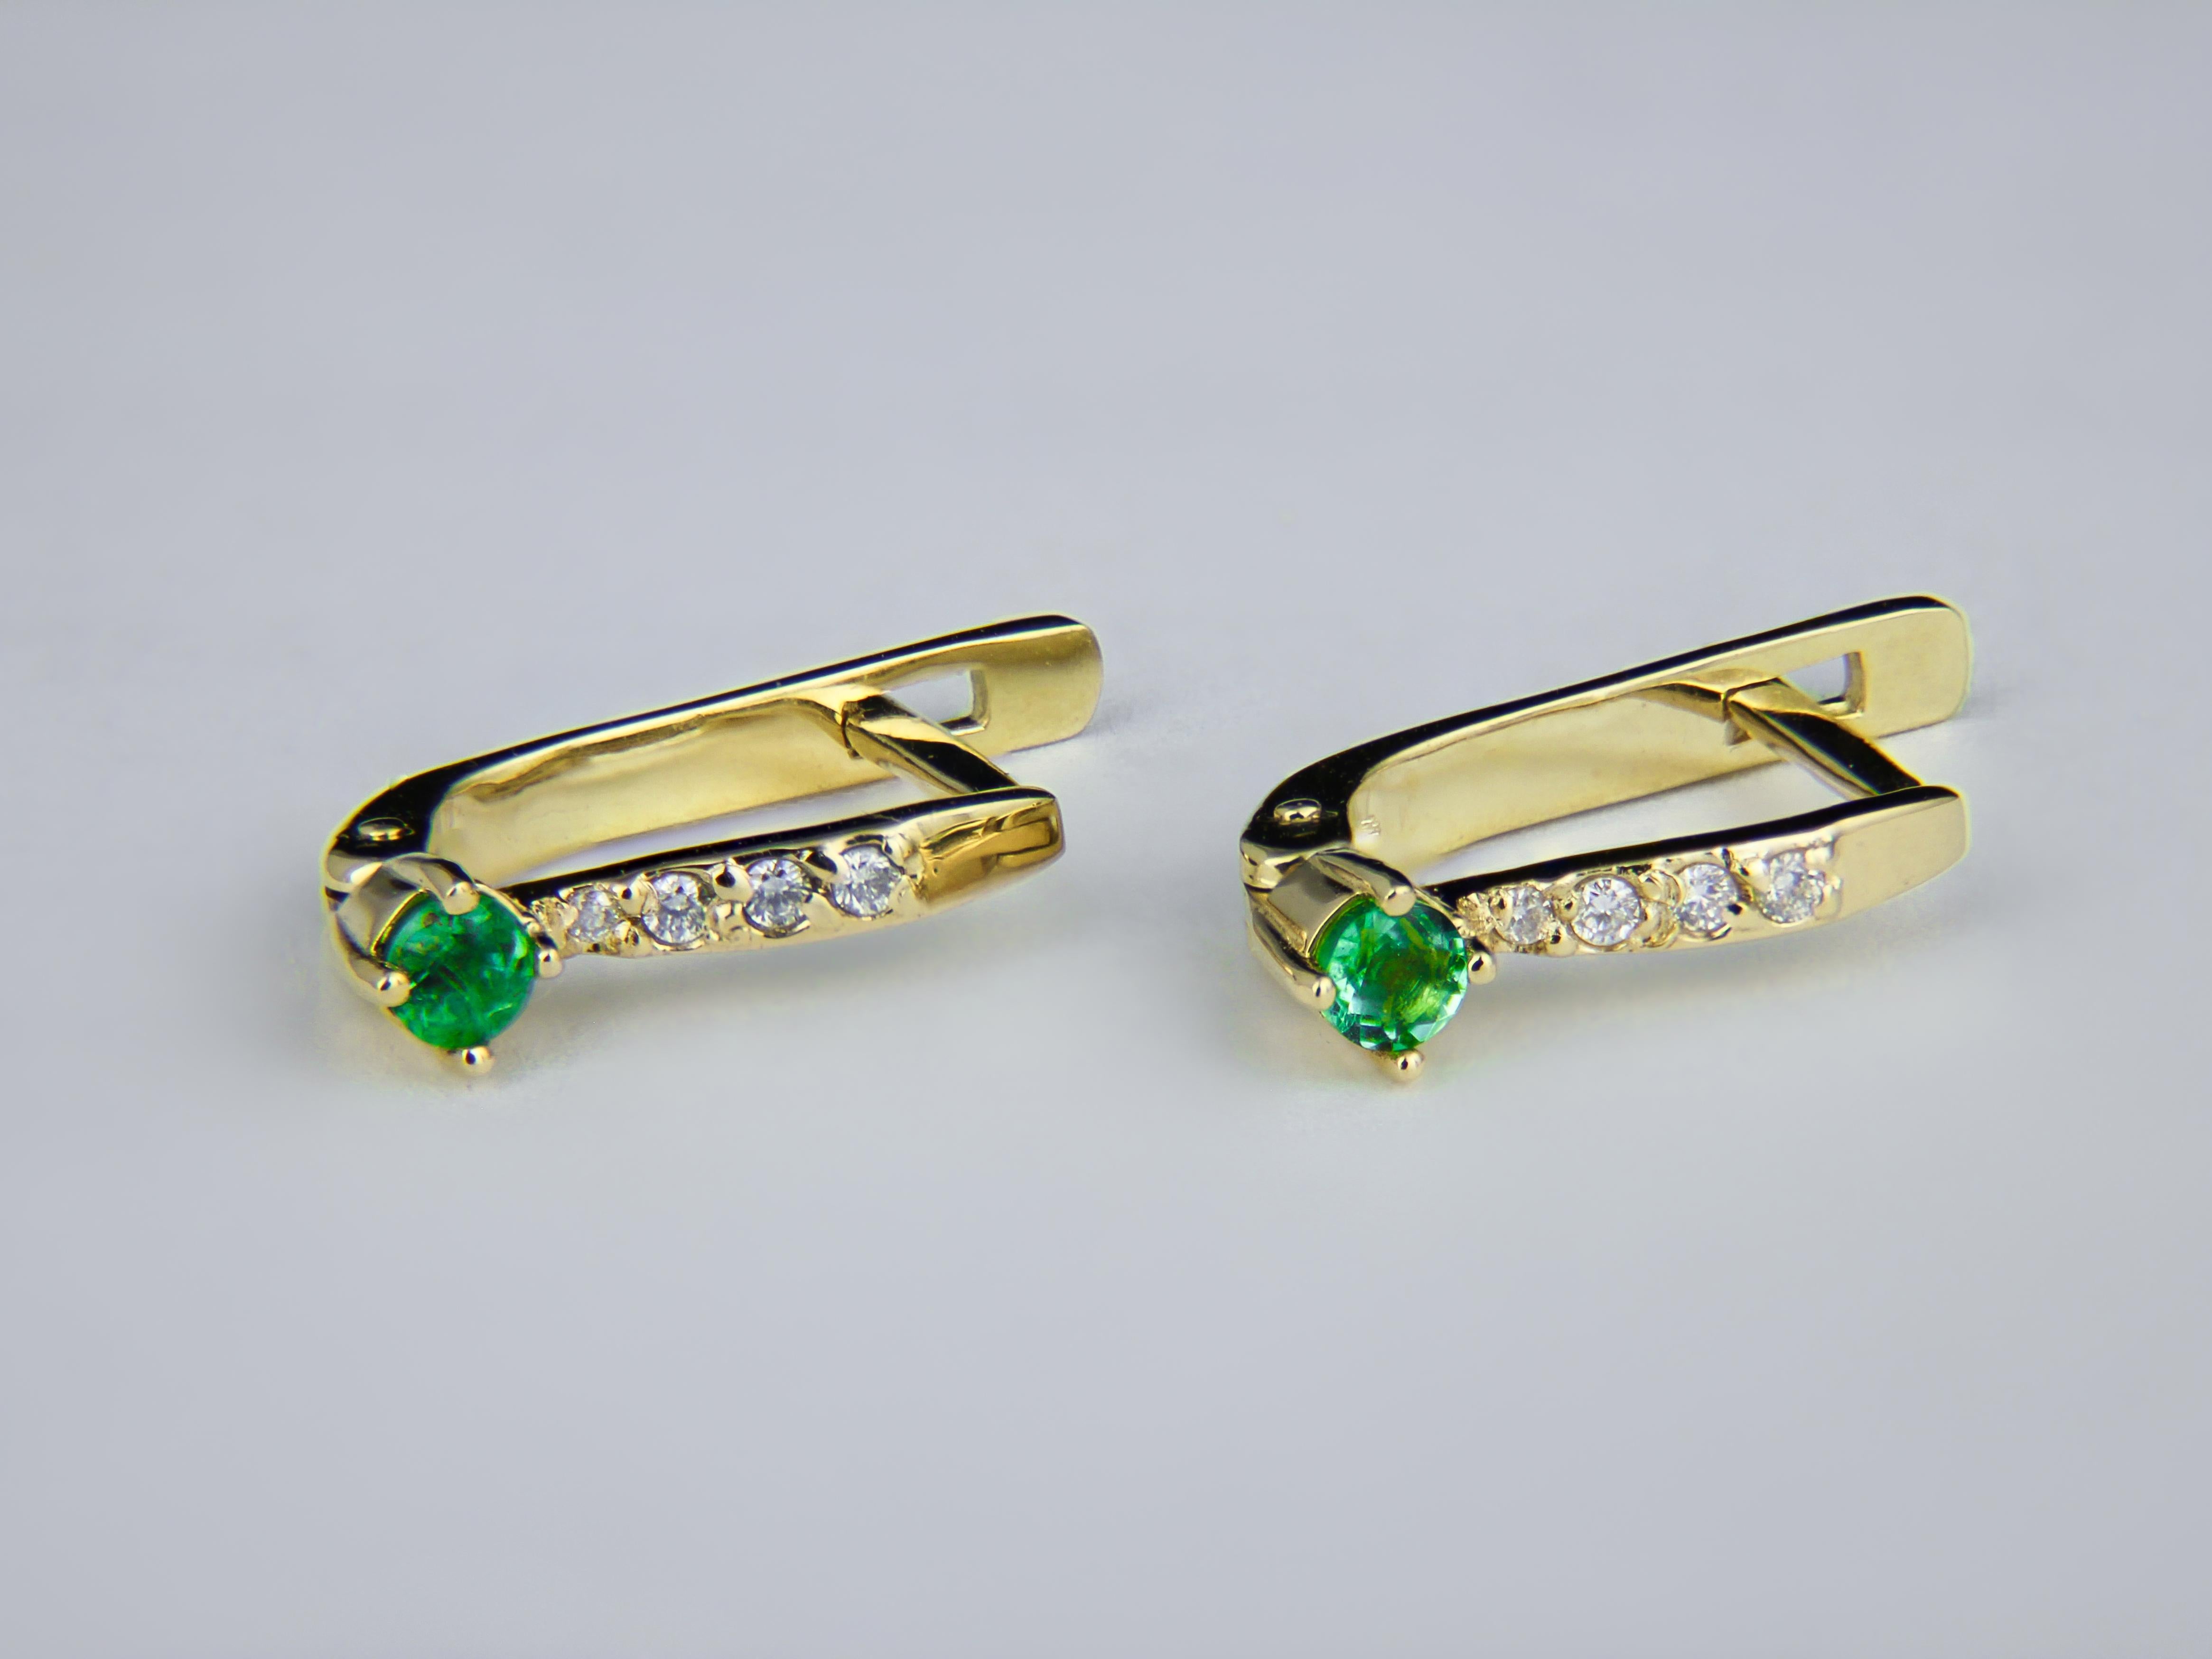 Emerald gold earrings. Tiny emerald earrings. Gold earrings for girl. Delicate emerald earrings. 14k Gold Earrings With Emeralds, Diamonds.  Young girl gold earrings with emeralds.

Total weight: 2 g. 
Gold -14k gold
Size: 16.4 x 3.65 mm. 
Central